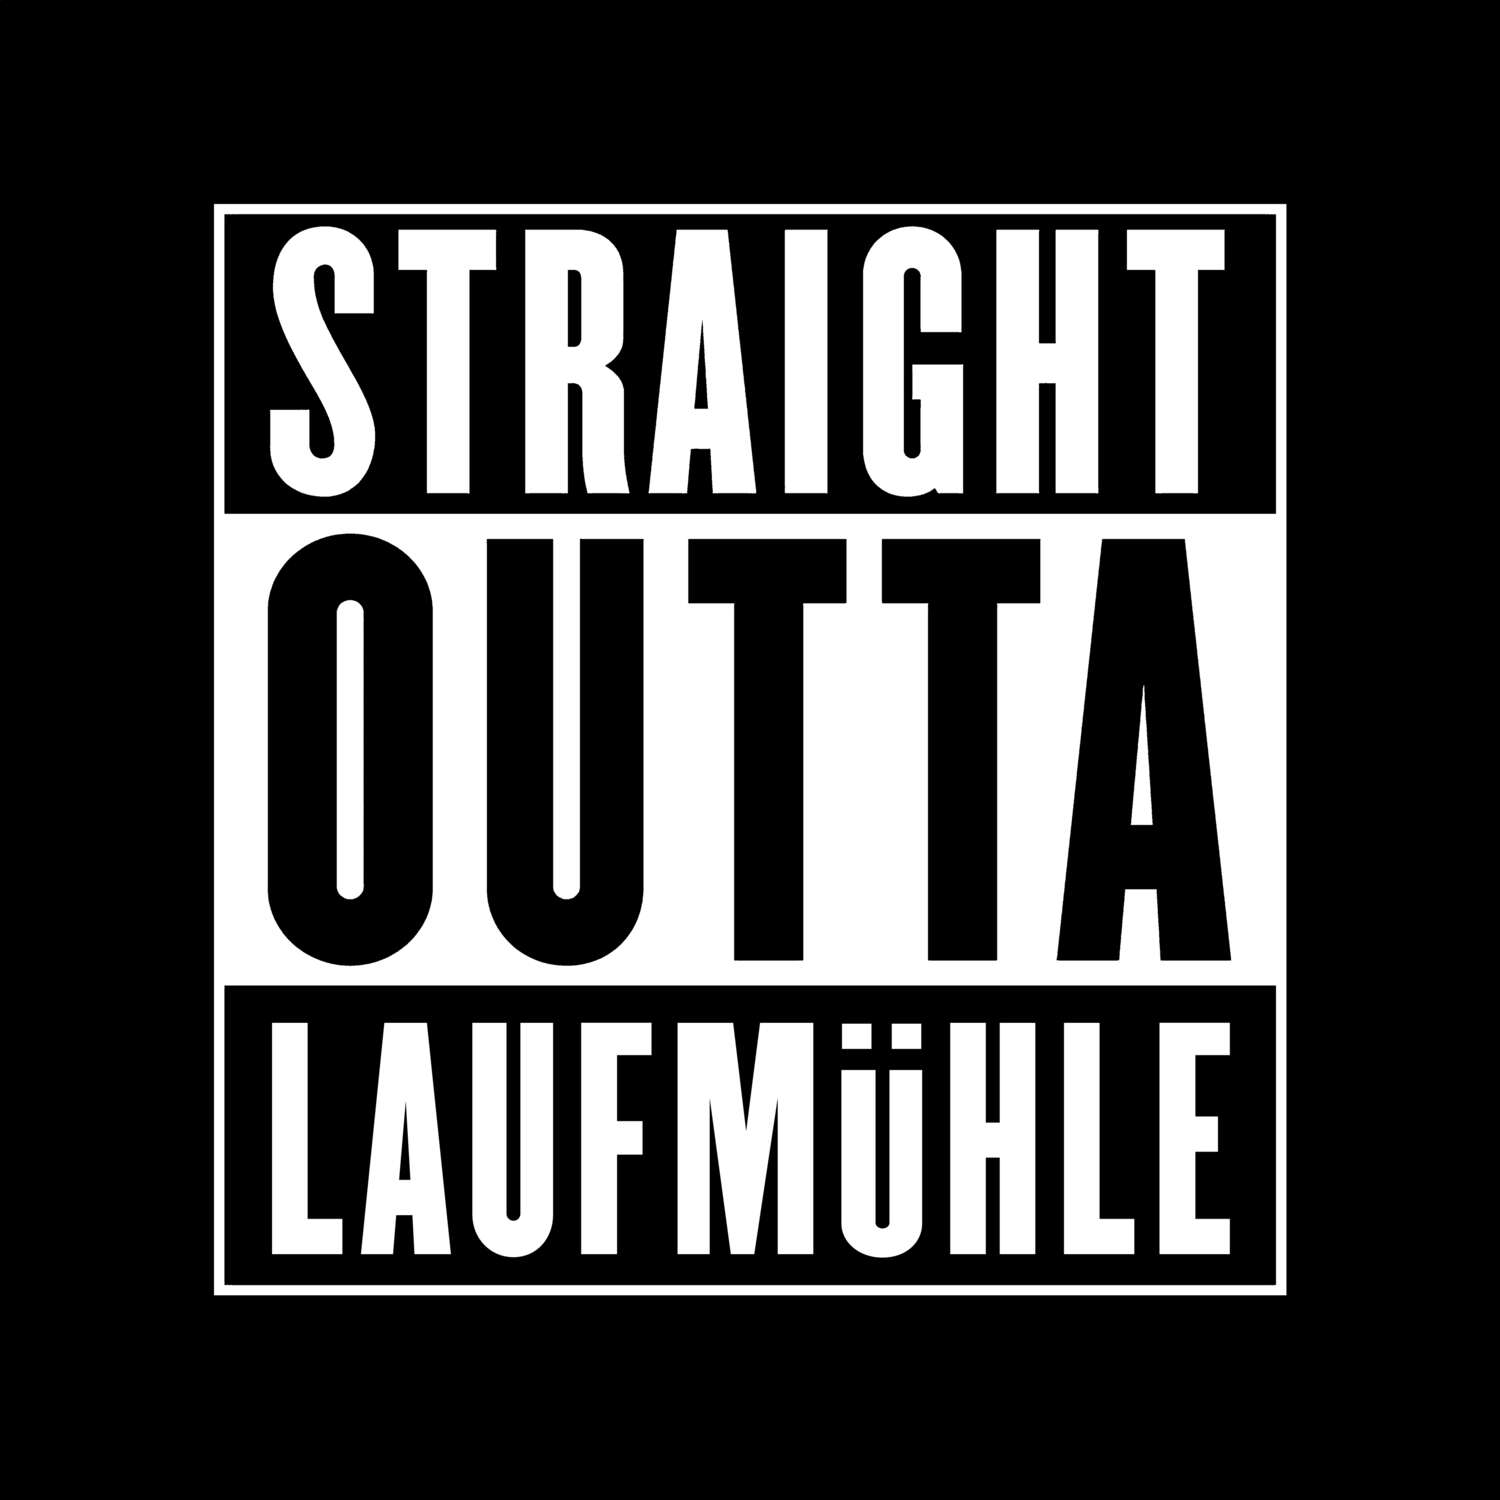 Laufmühle T-Shirt »Straight Outta«